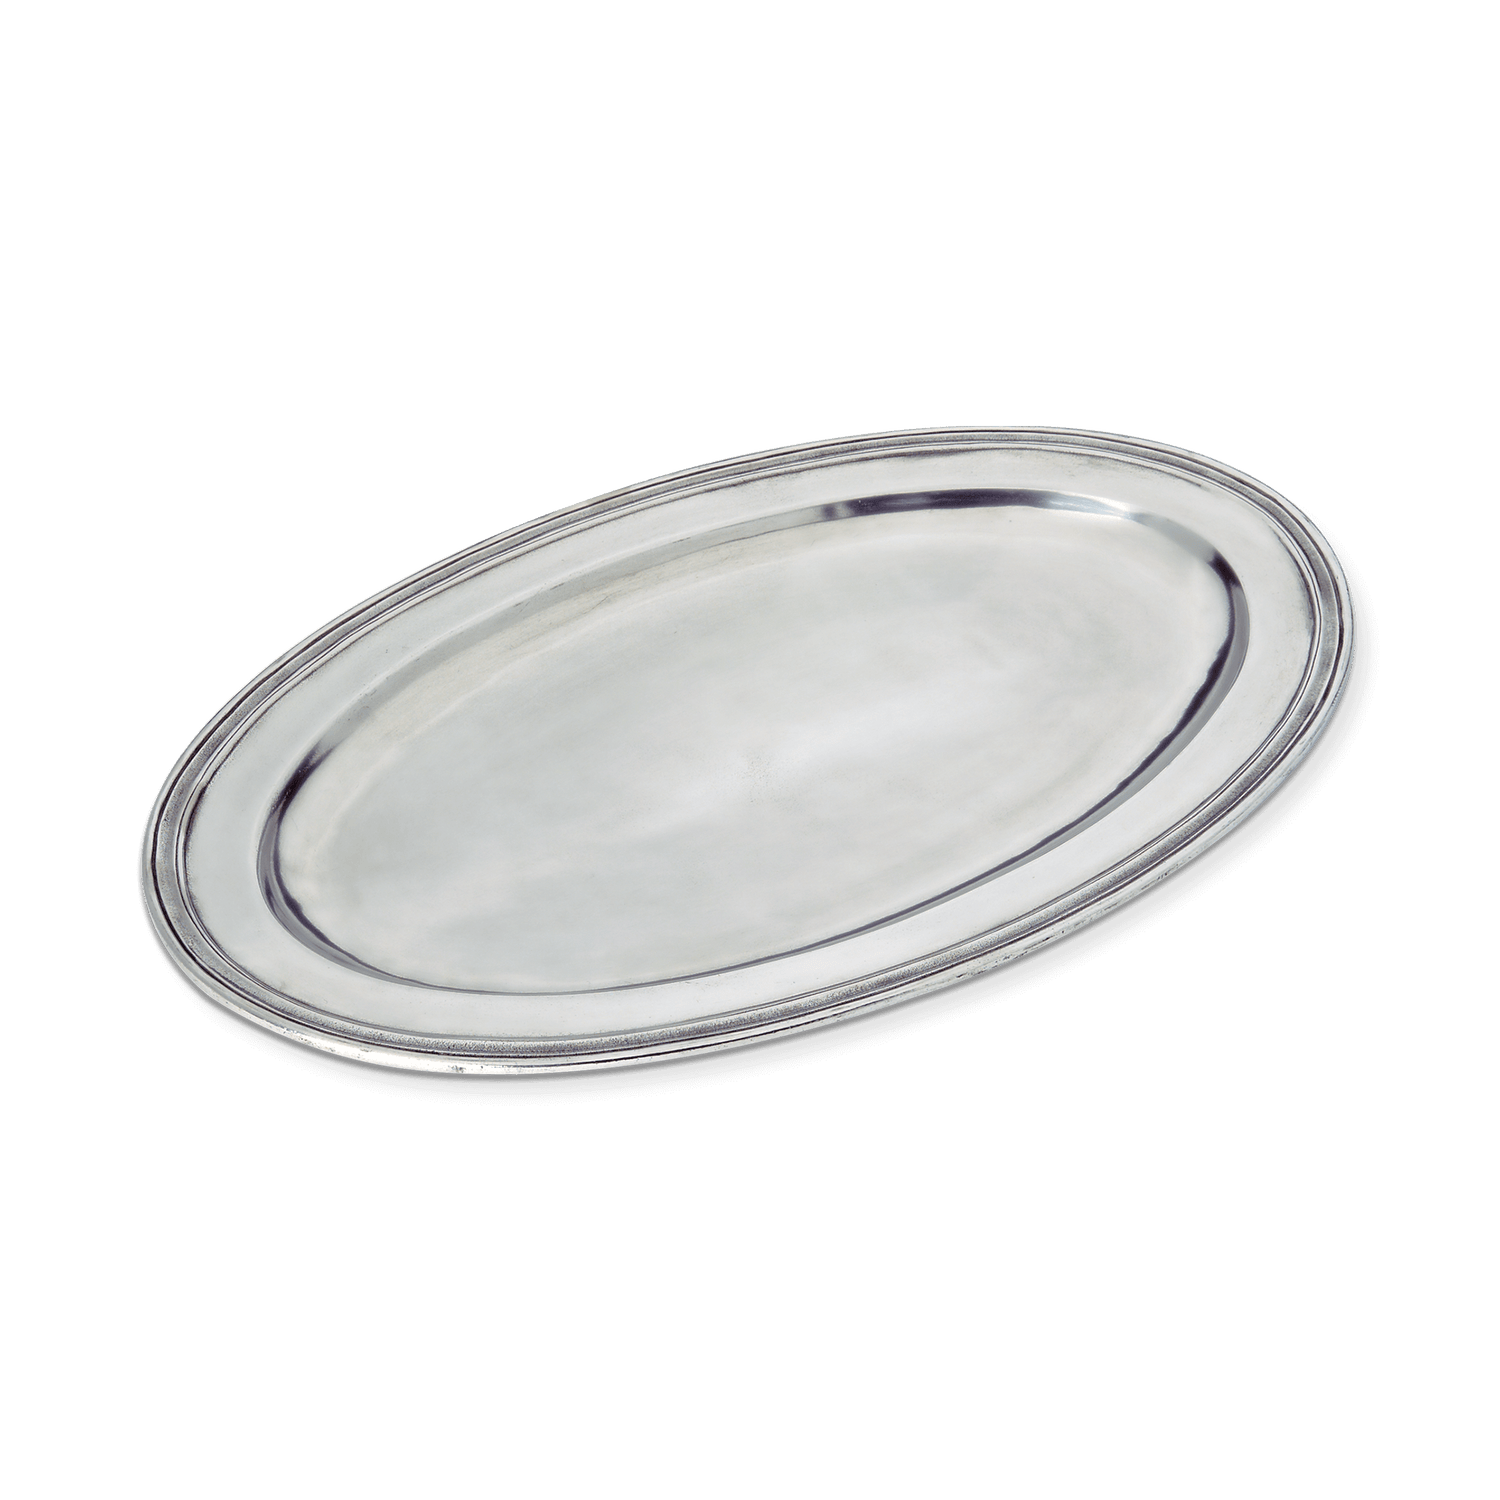 Serving Dishes  Trays, Platters, Plates, Bowls and Vases